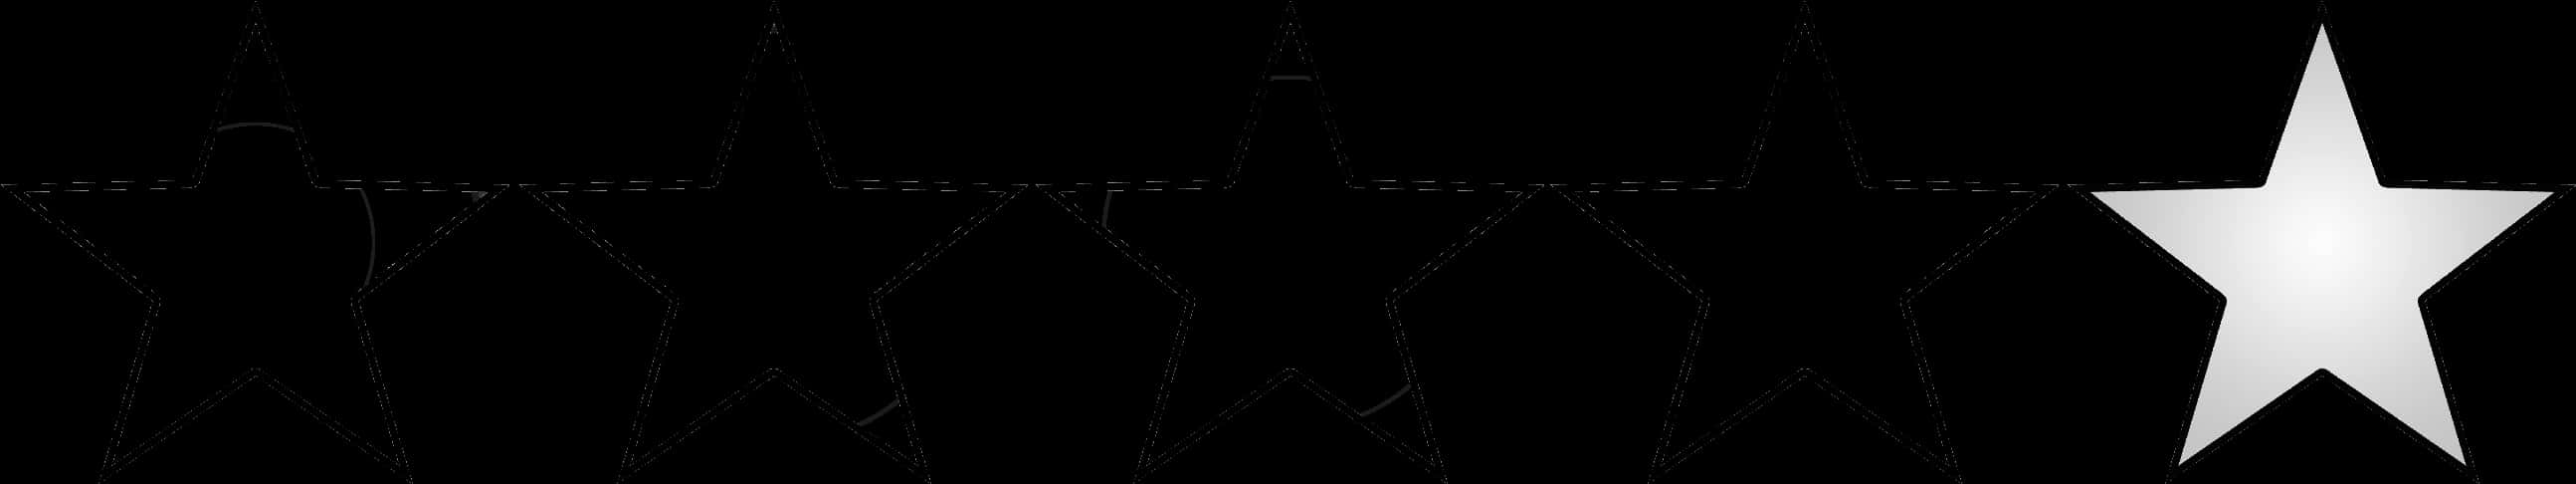 A Star In A Black Background